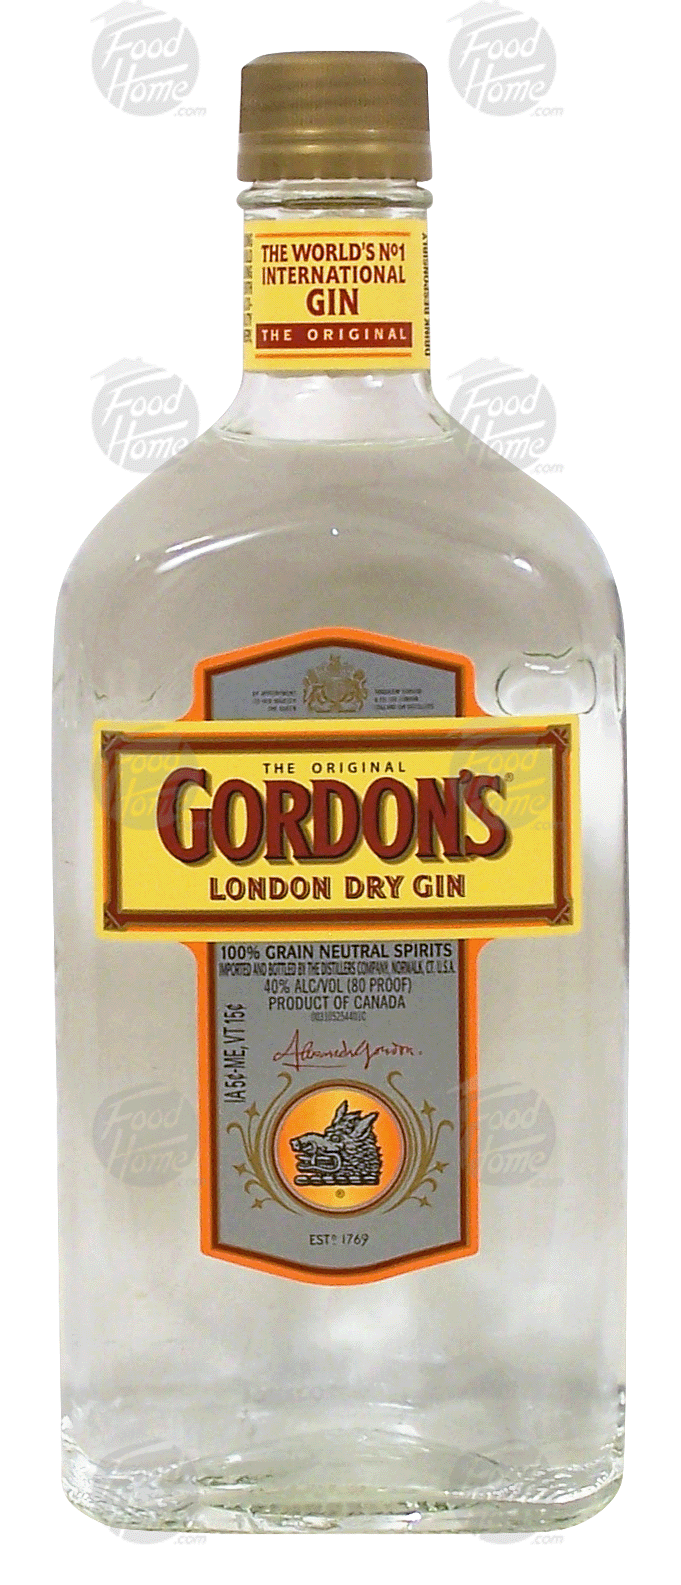 Gordon's The Original london dry gin, 40% alc. by vol. Full-Size Picture